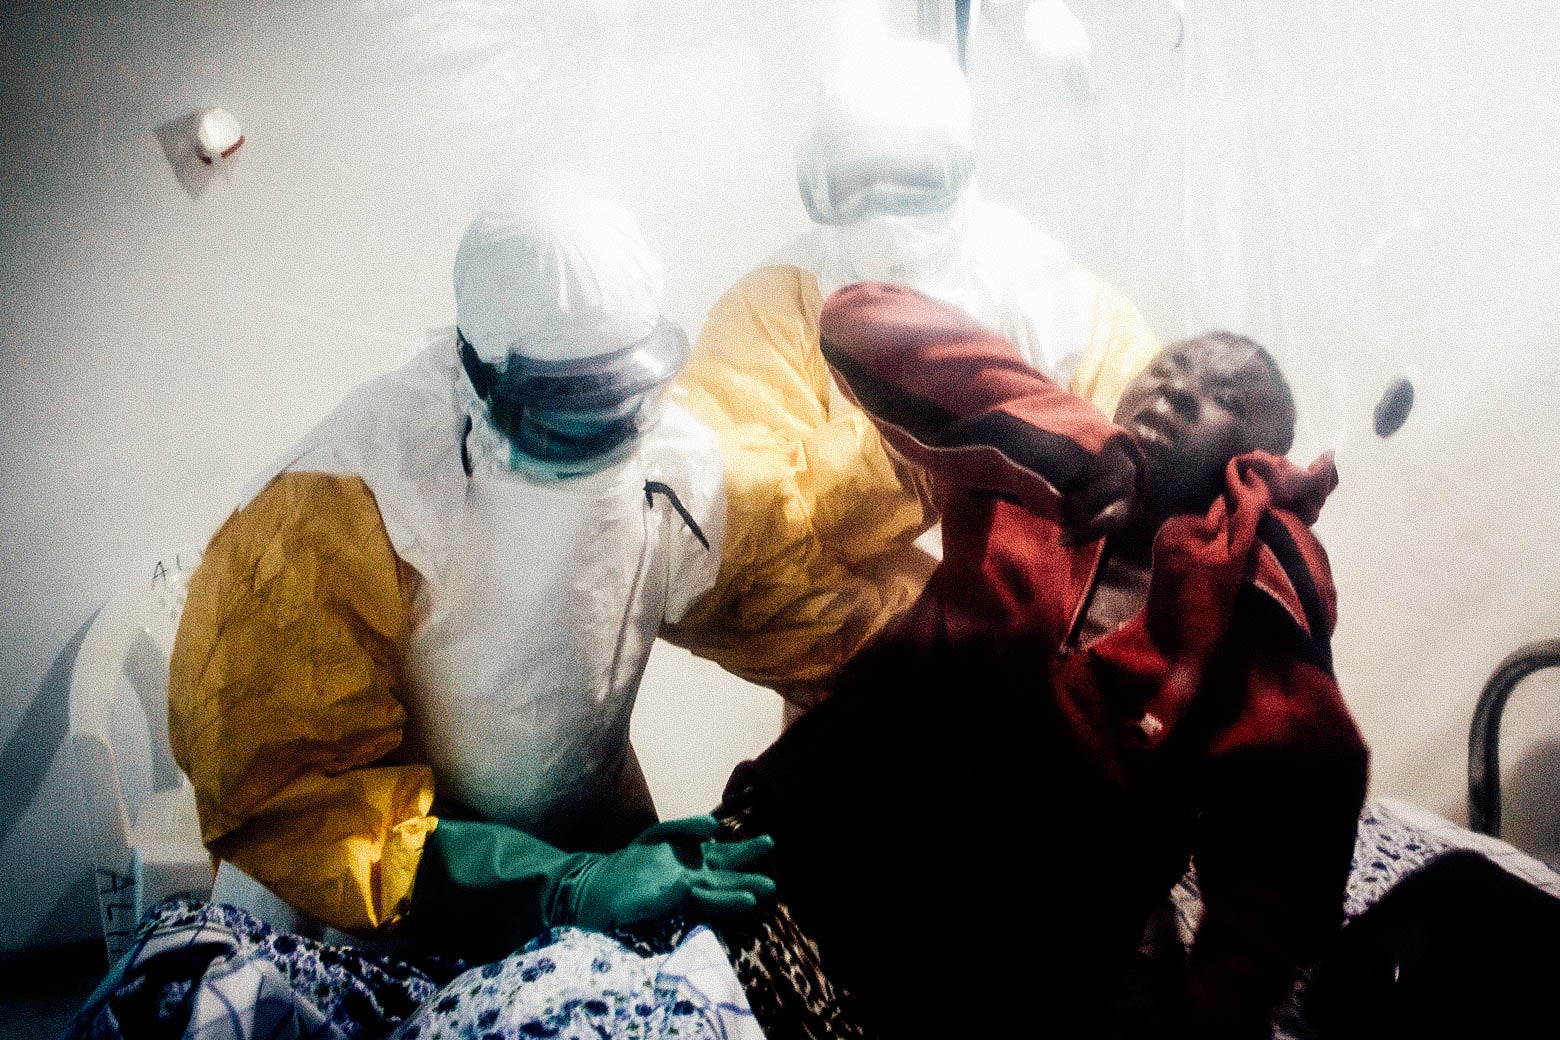 An Ebola patient is lifted up by two medical workers after being admitted into a Biosecure Emergency Care Unit on Aug. 15 in Beni.